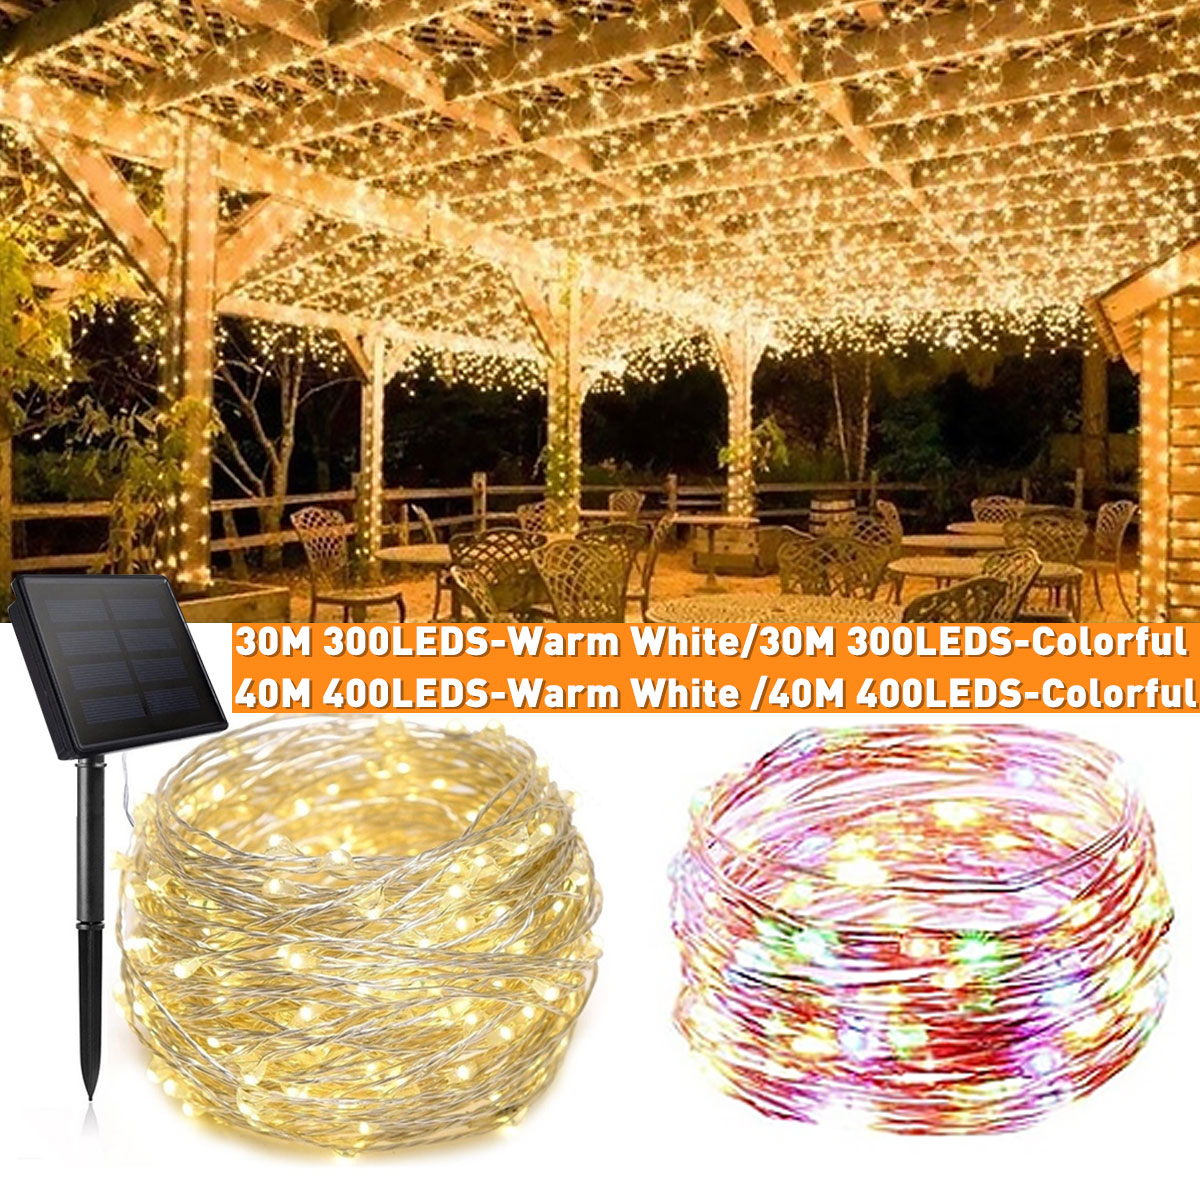 300400-LED-Waterproof-Colorful-Light-Fairy-String-Rope-Solar-Lights-Outdoor-1729916-1